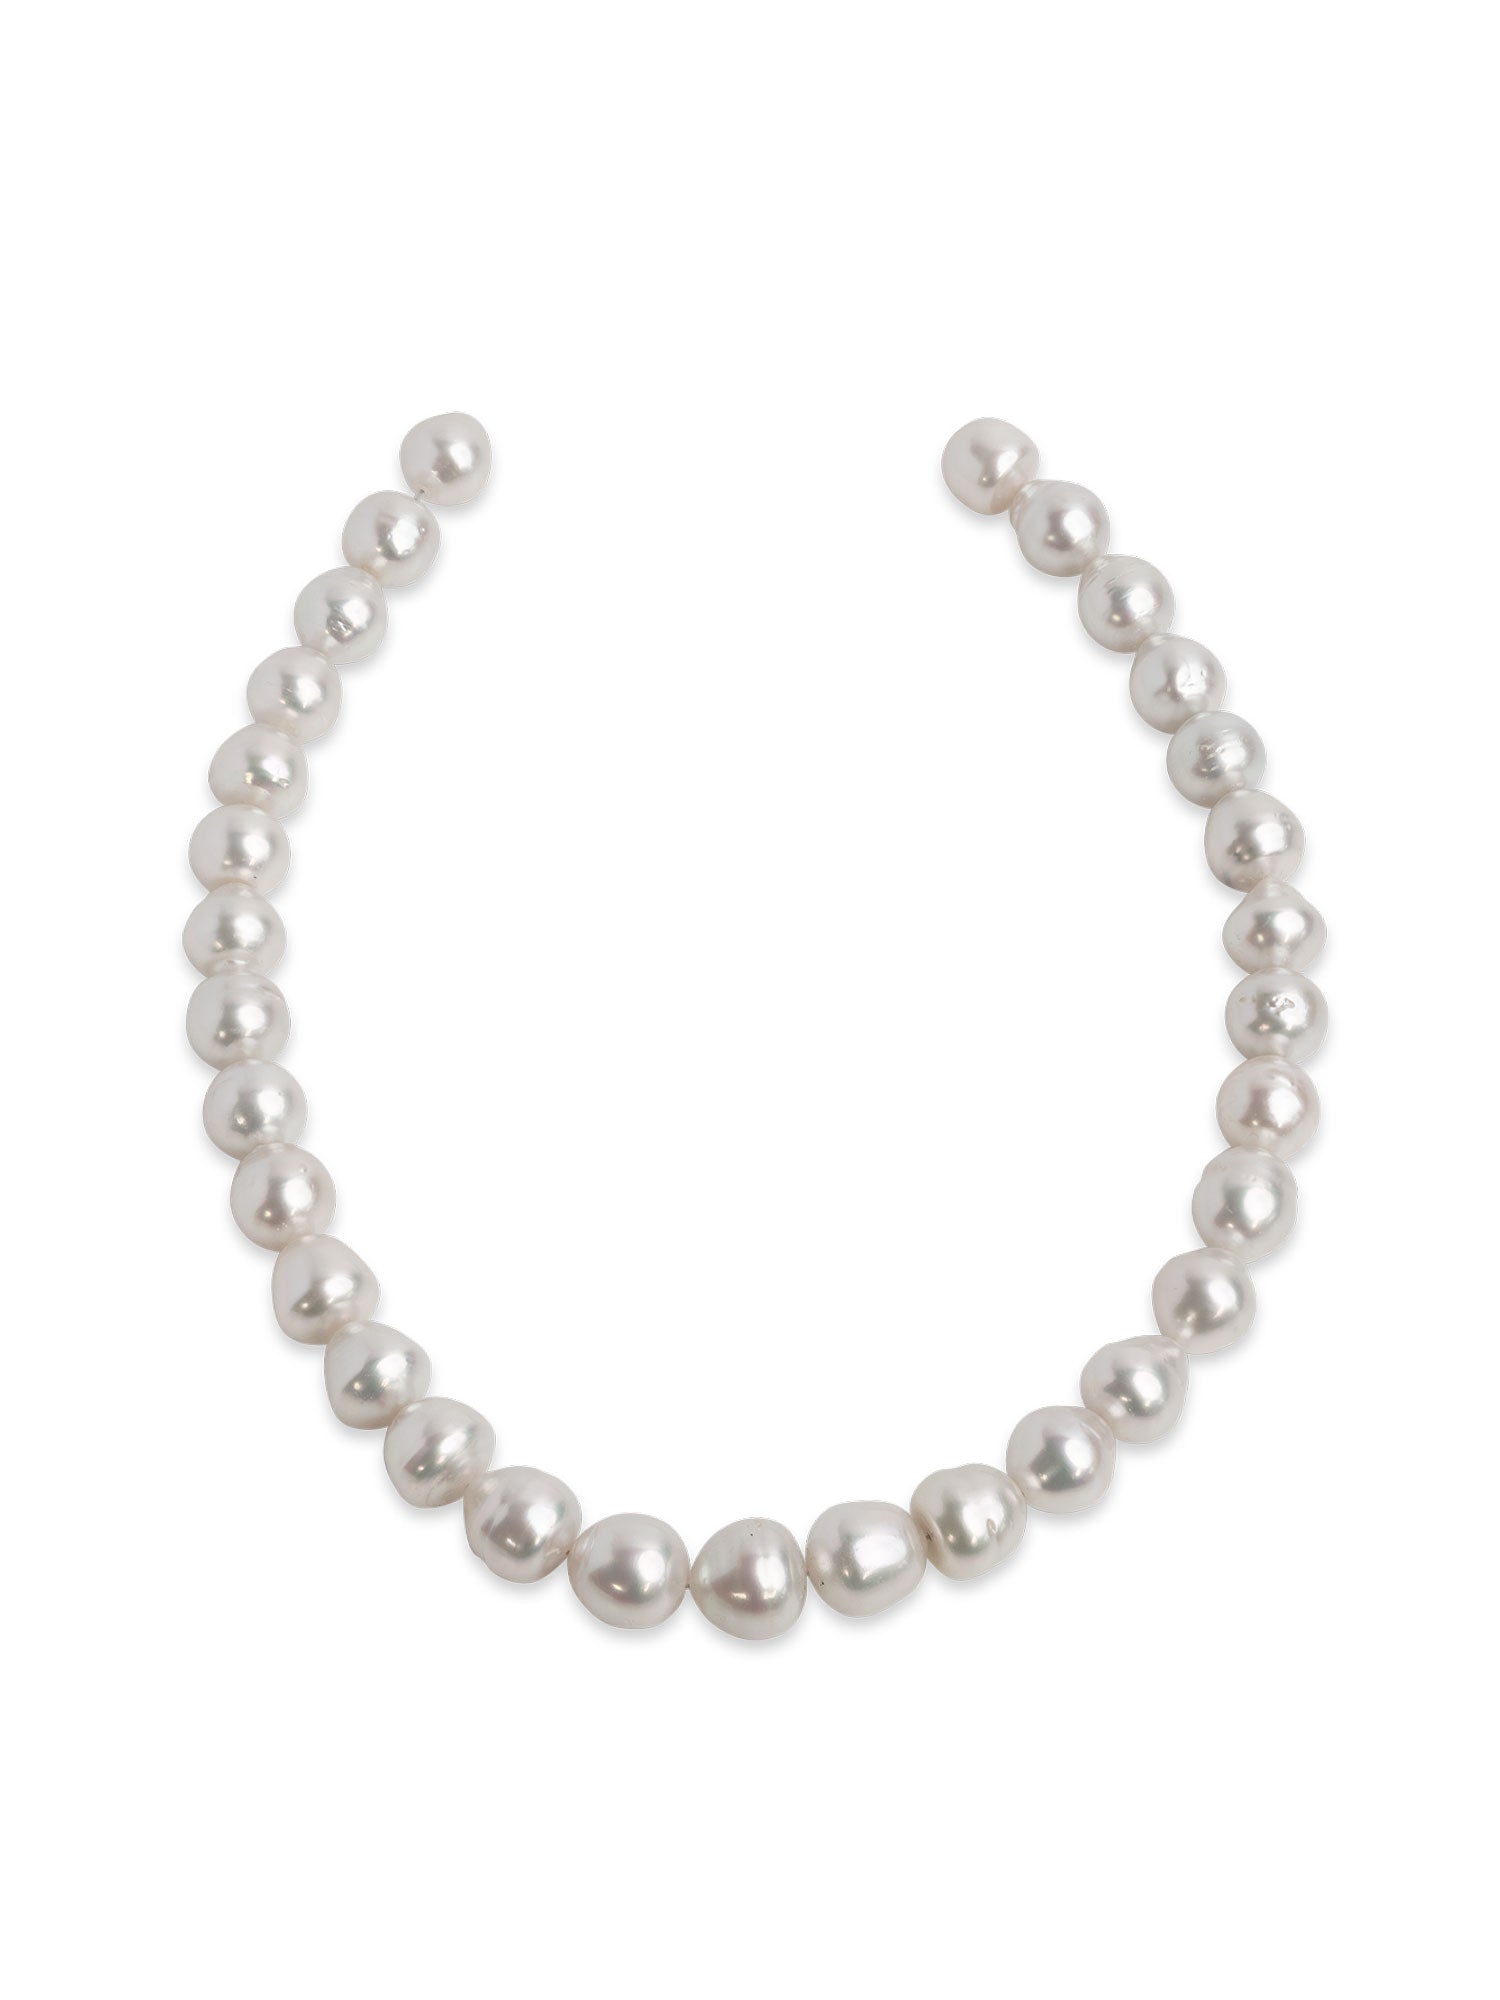 12 - 15mm Australian Cultured Pearl Necklace |